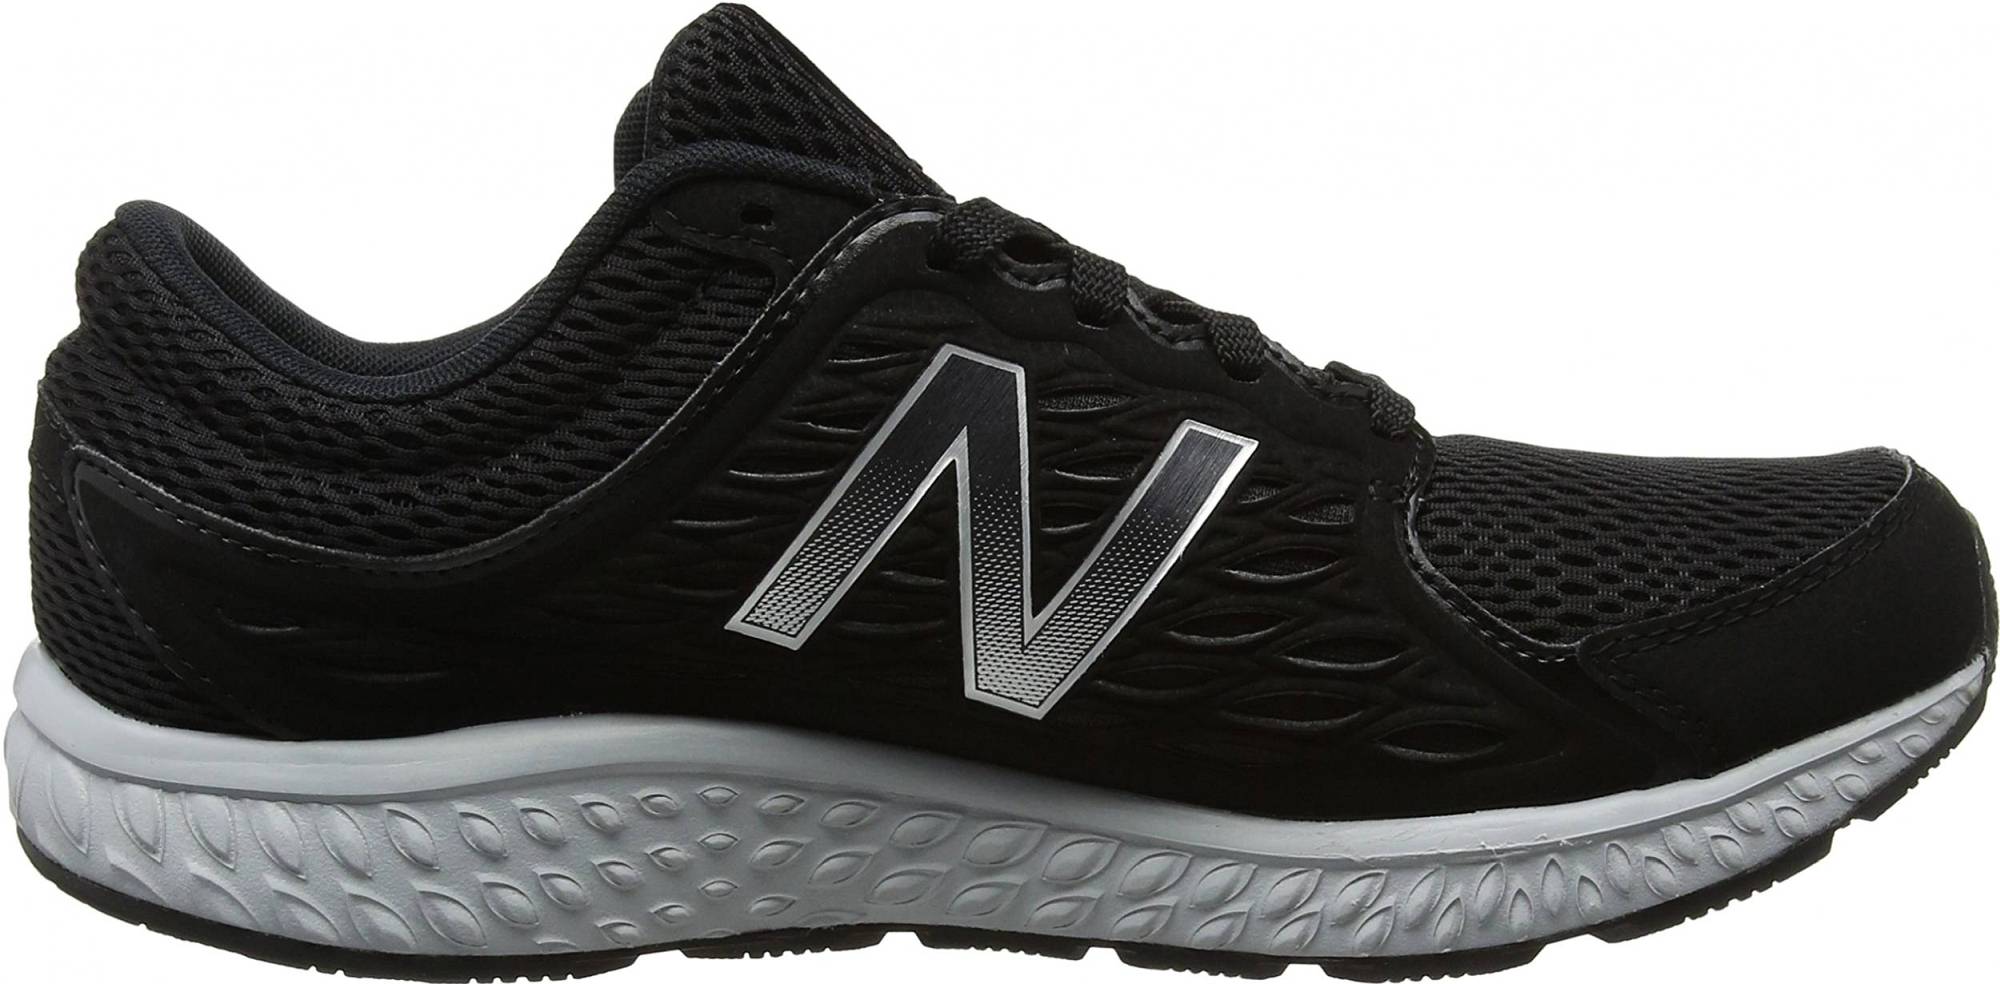 New Balance 420 – Shoes Reviews & Reasons To Buy